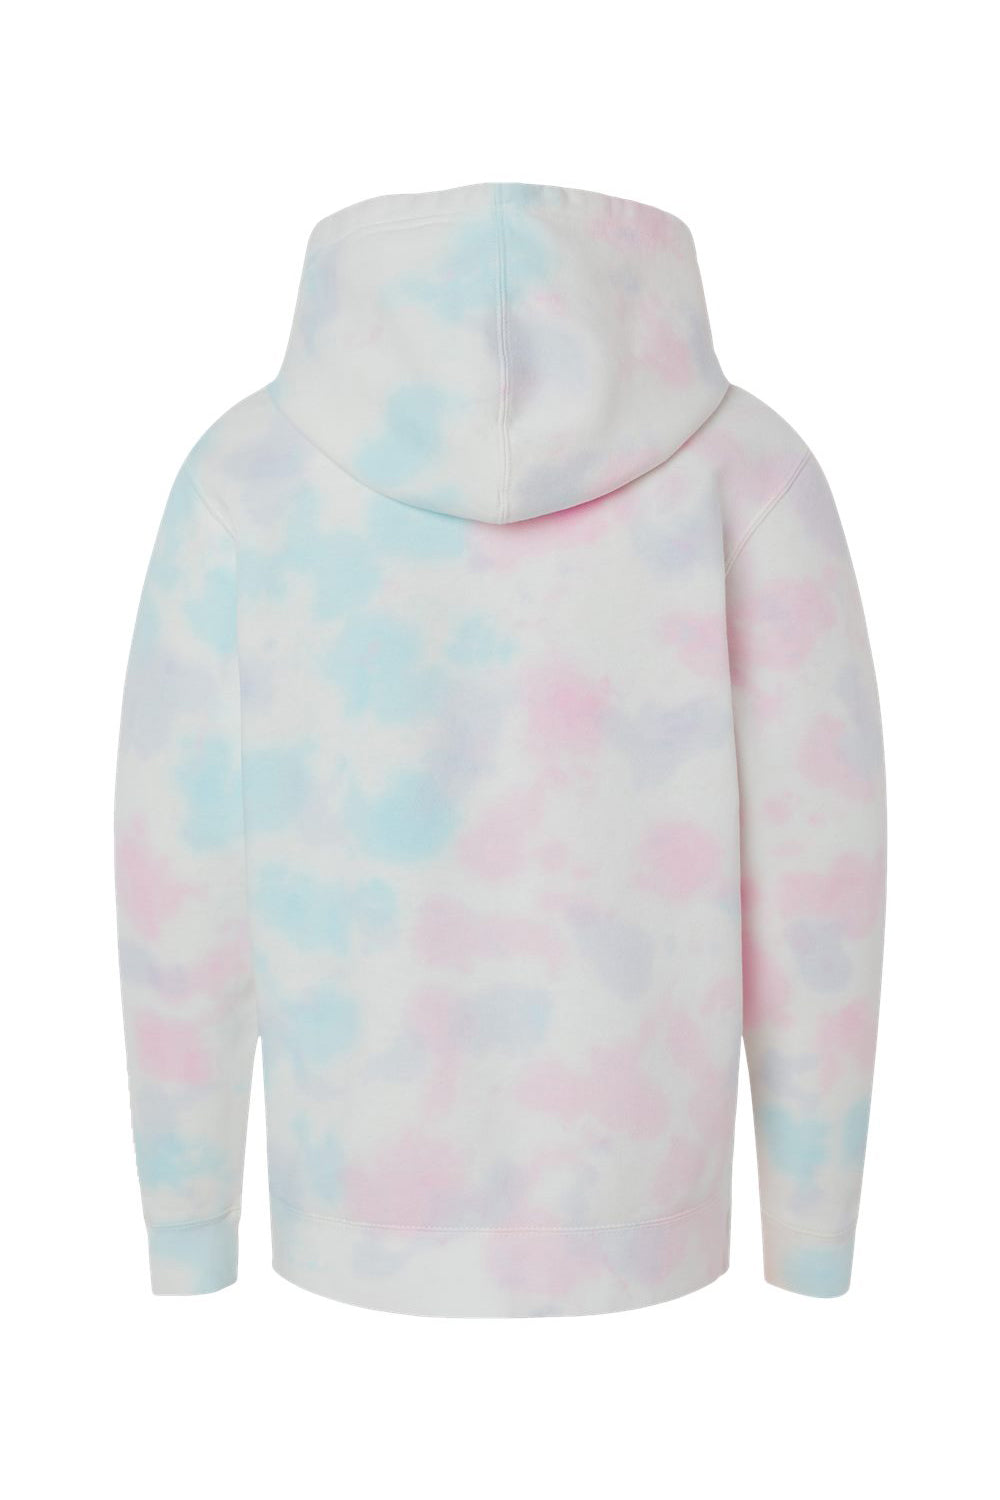 Independent Trading Co. PRM1500TD Youth Tie-Dye Hooded Sweatshirt Hoodie Cotton Candy Flat Back